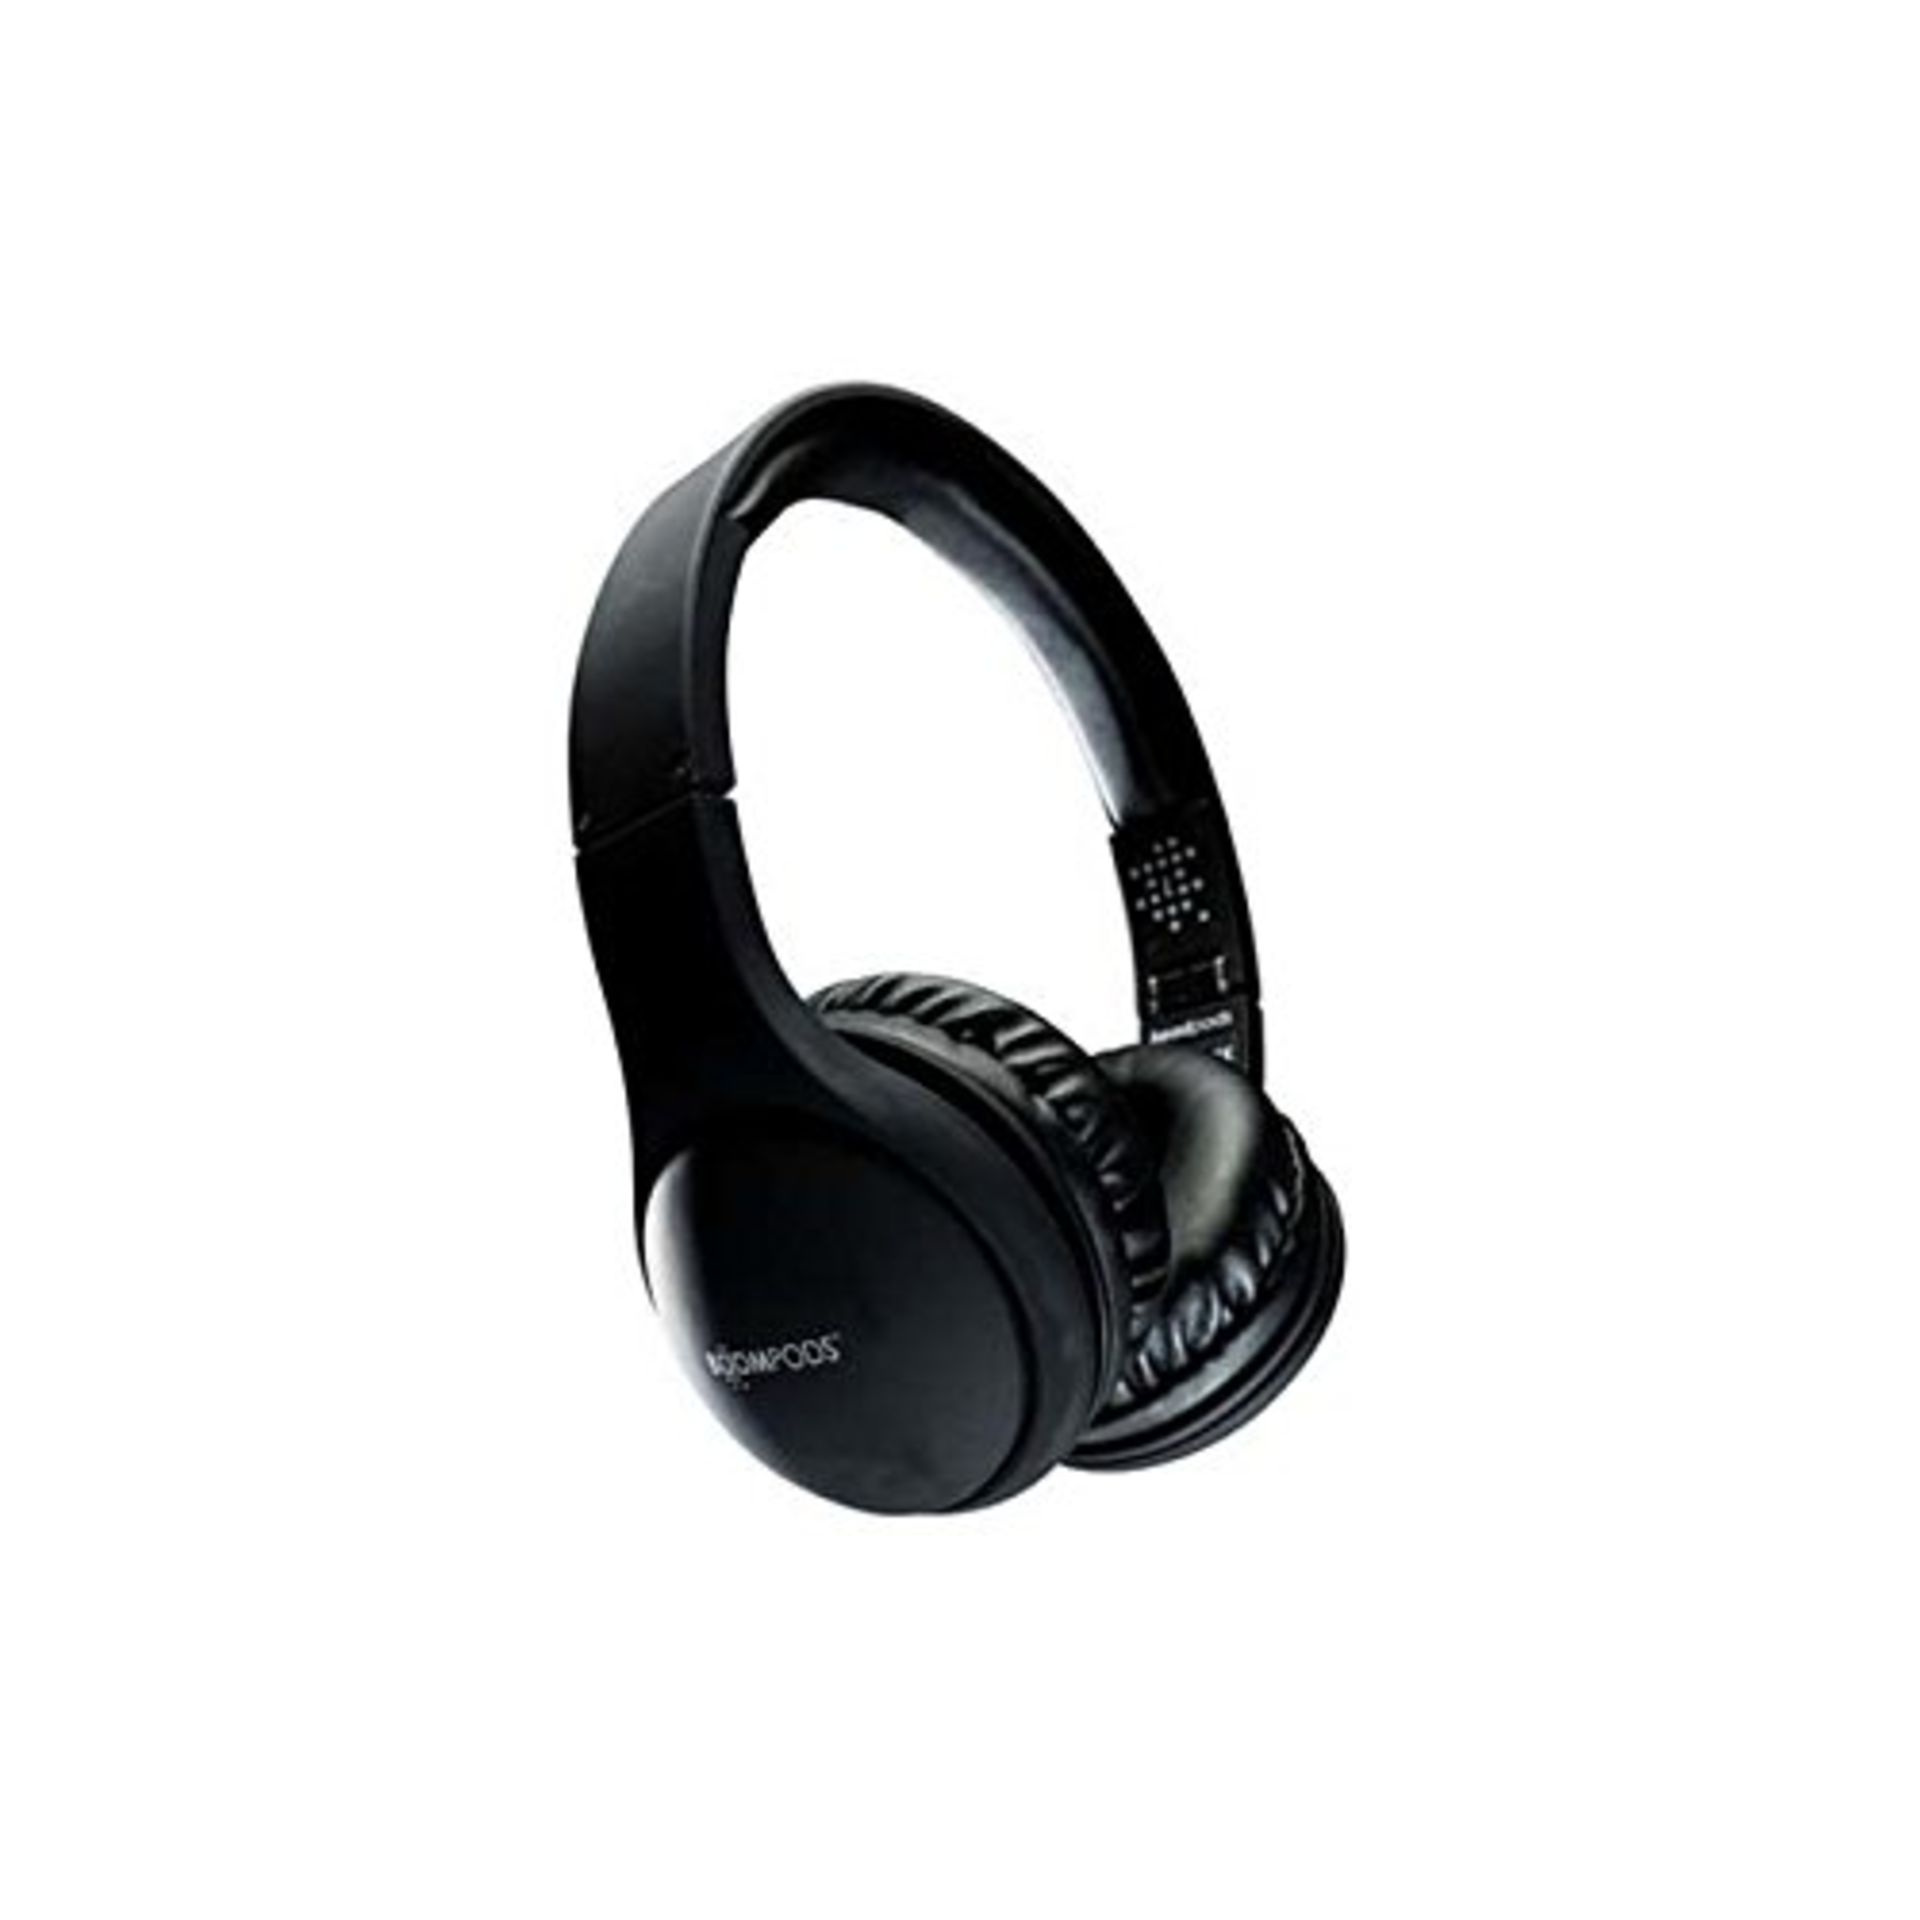 V Brand New Headpods Folding Stereo Headphones With Remote And Mic And Travel Case RRP: 39.99 Amazon